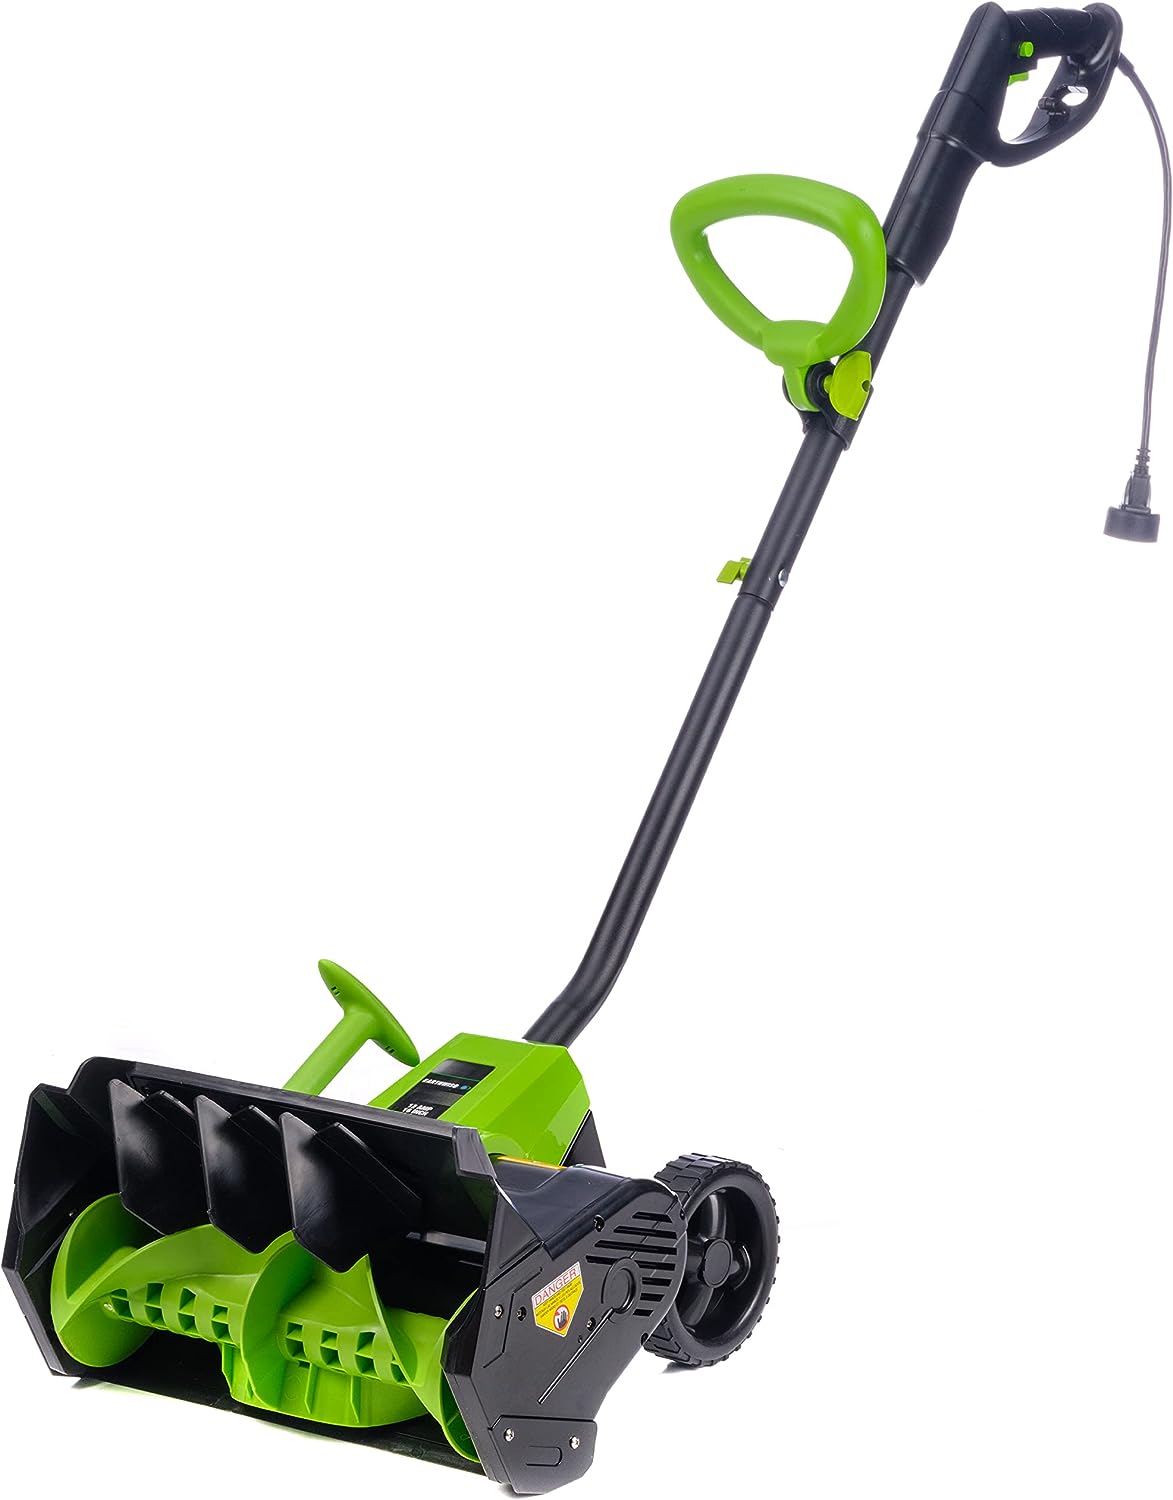 Earthwise SN70016 Electric Corded 12Amp Snow Shovel, [...]